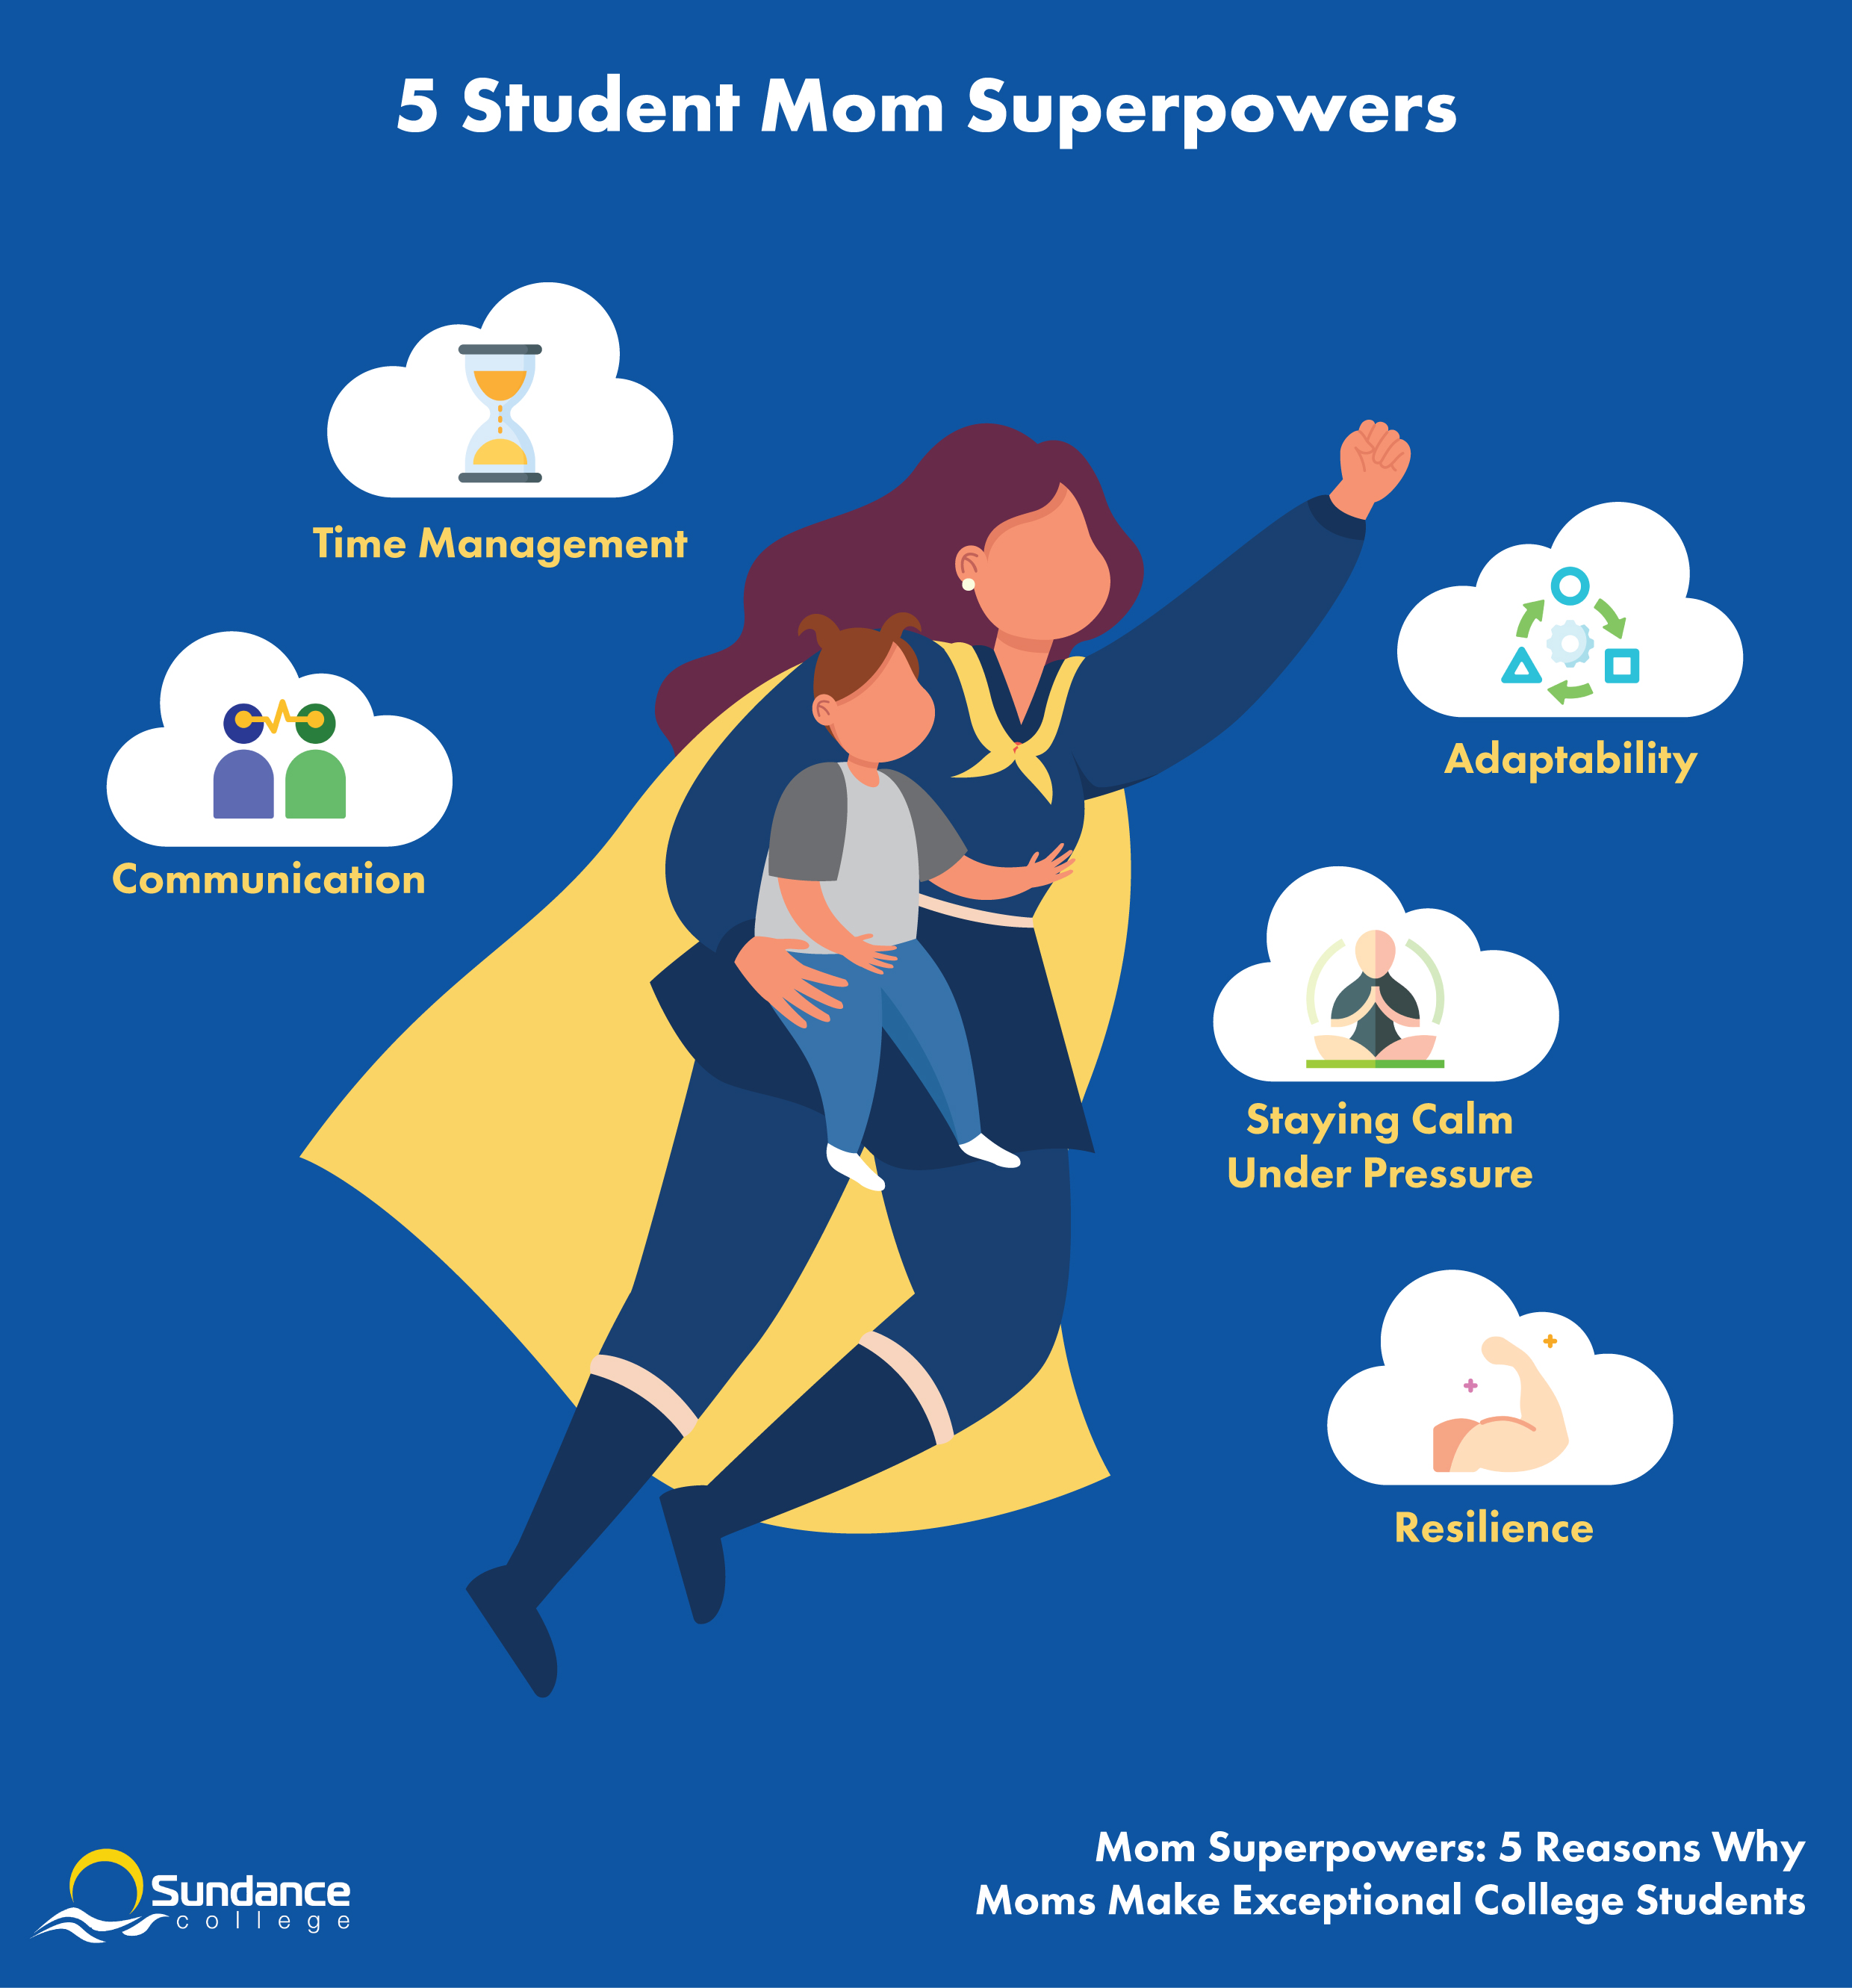 Infographic depicting 5 student mom superpowers: time management, communication, adaptability, staying calm under pressure, resilience.